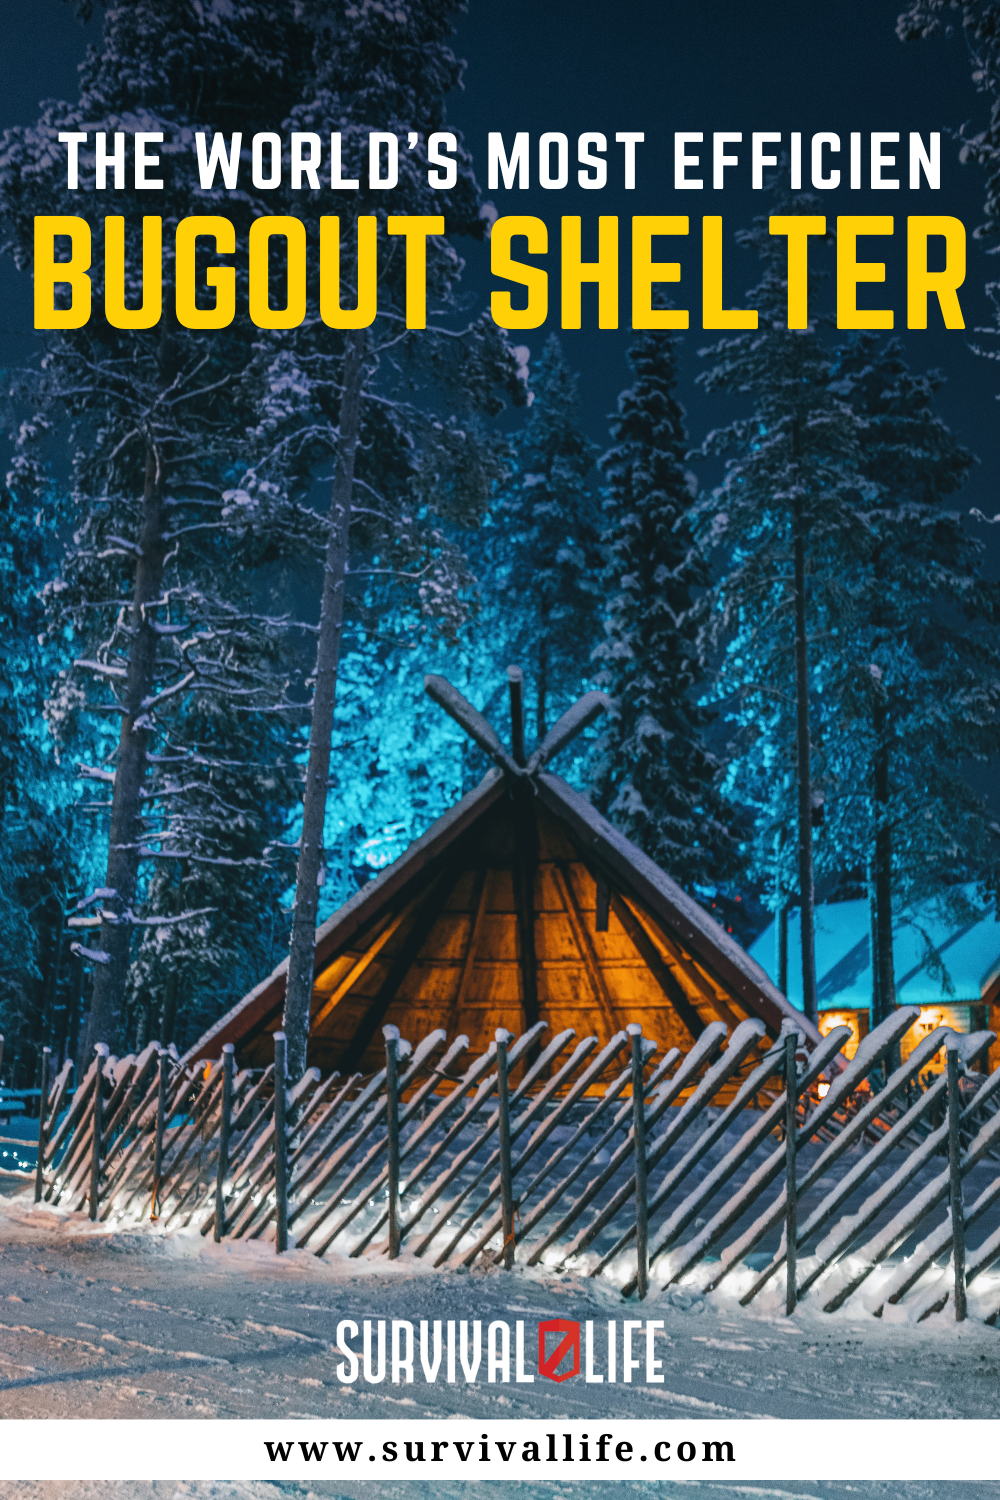 The World’s Most Efficient Bugout Shelter